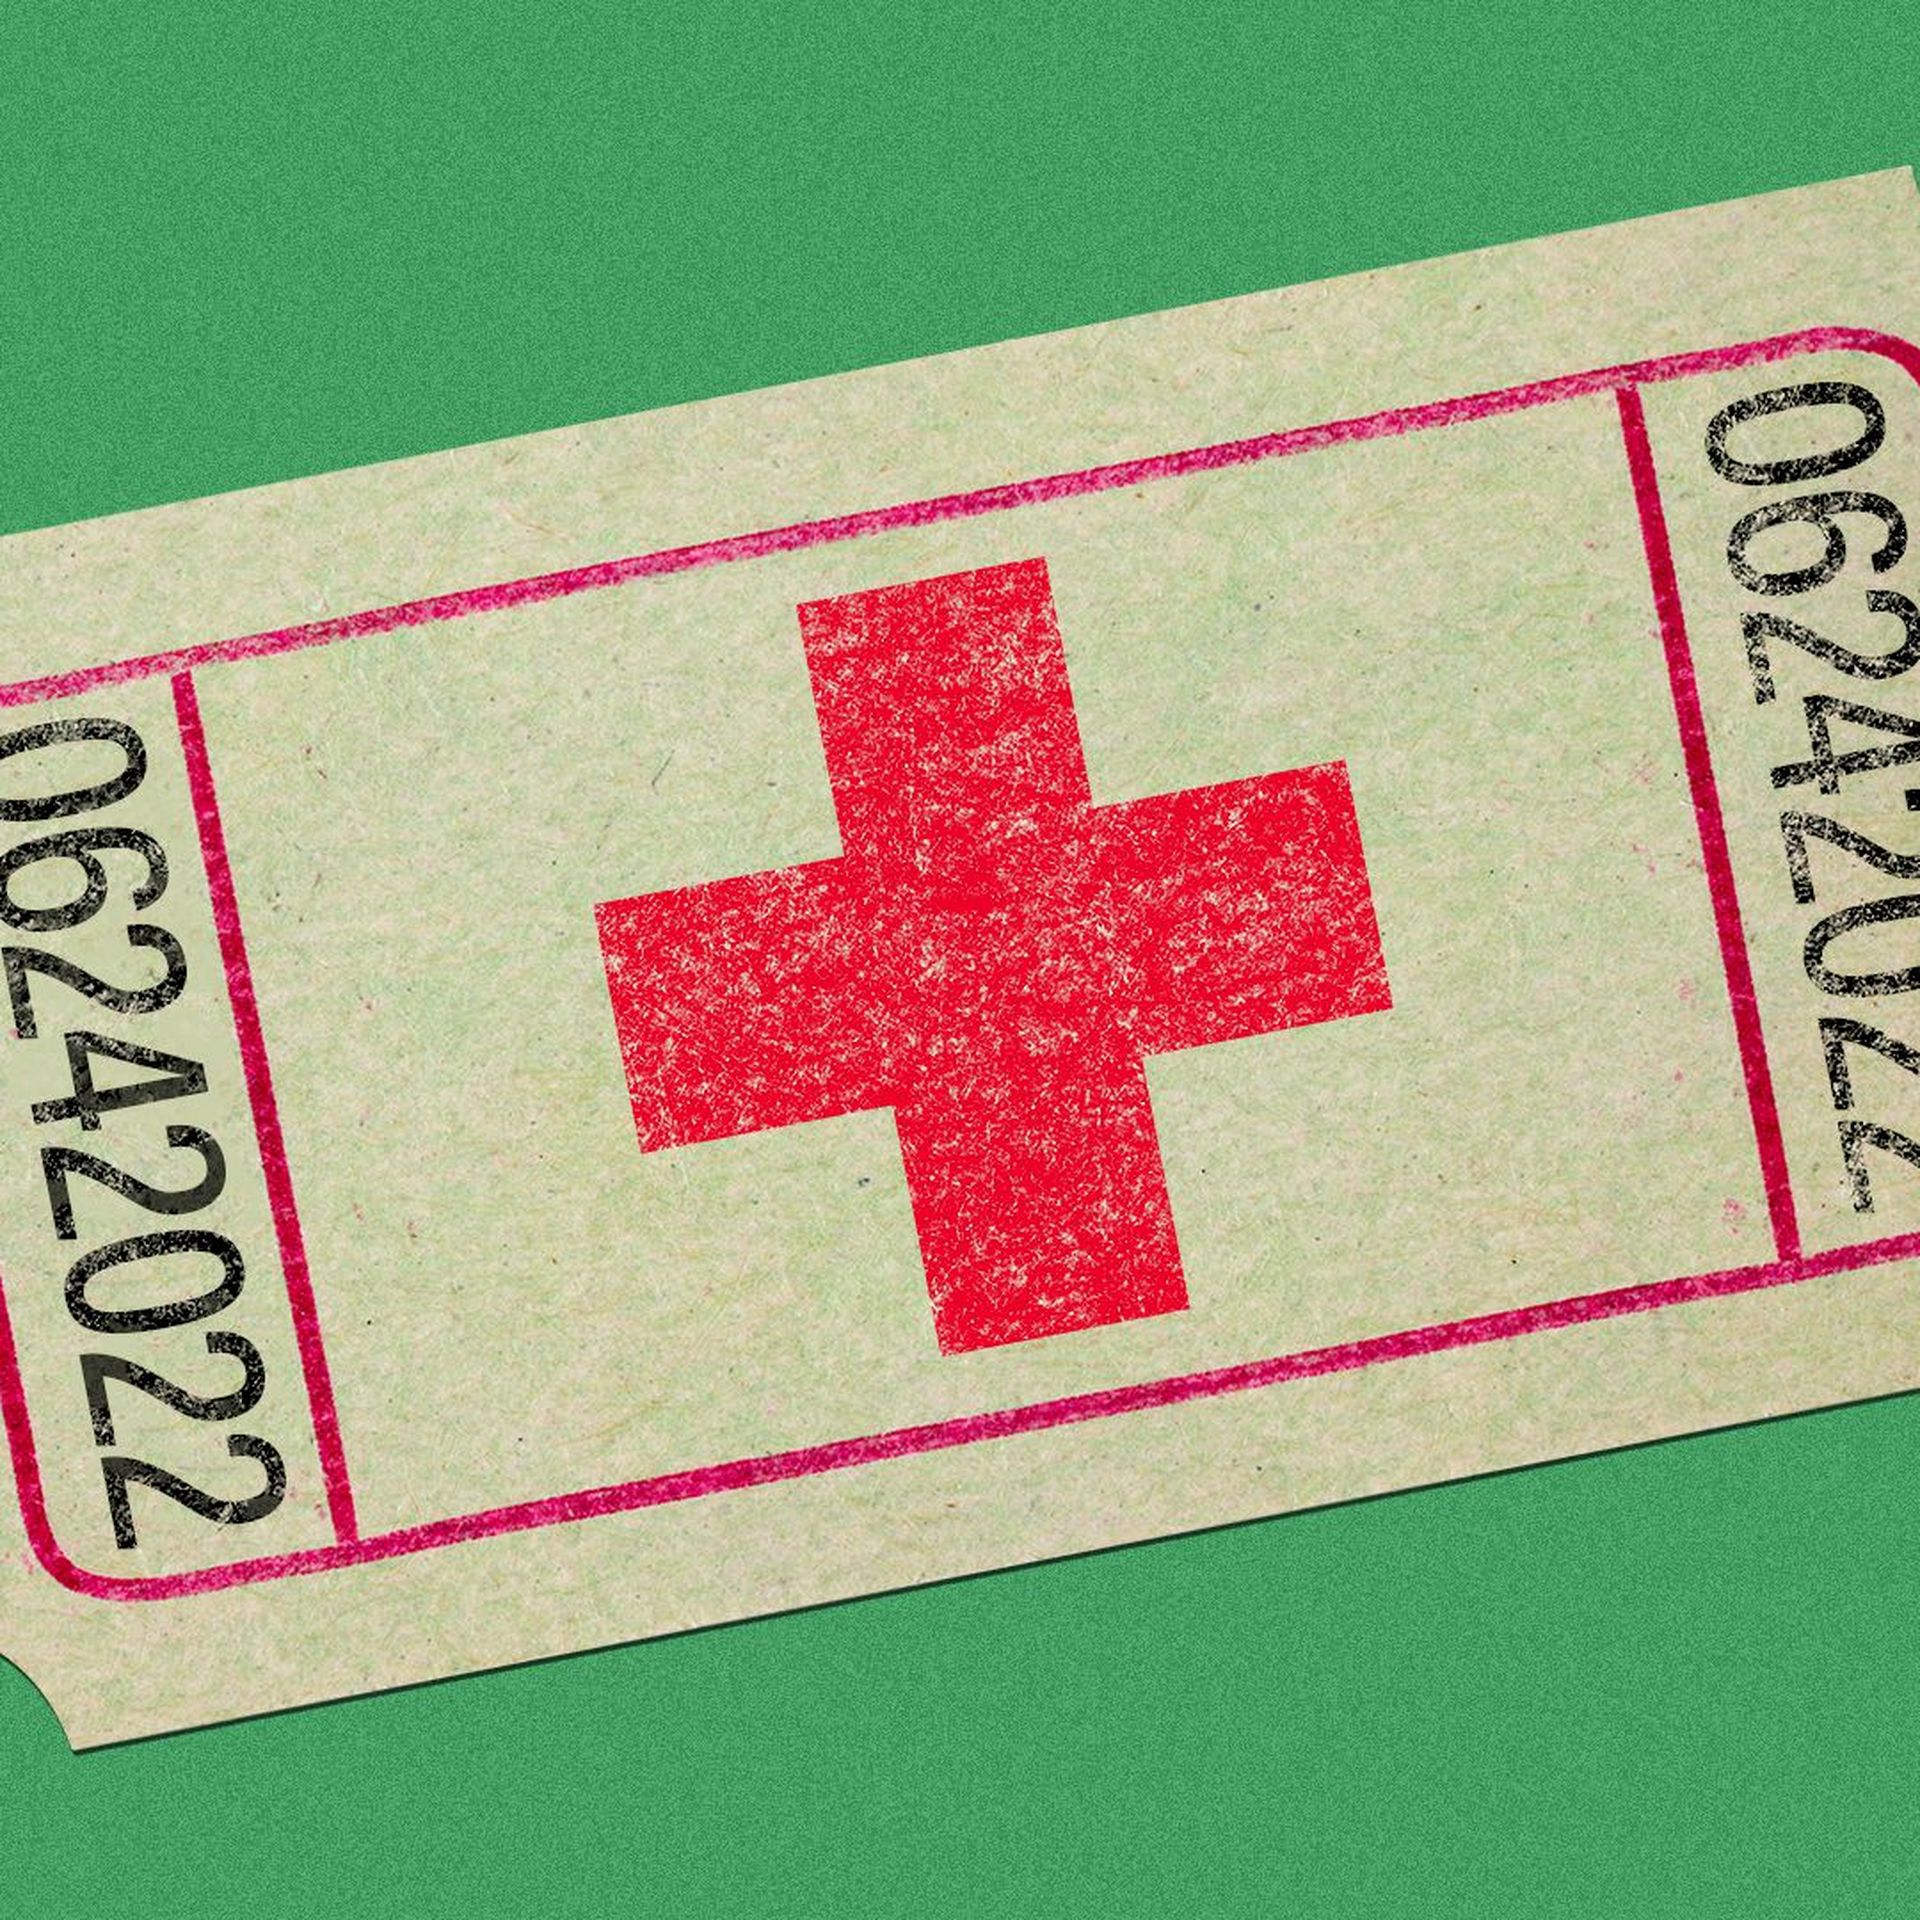 Illustration of a red cross on a ticket.